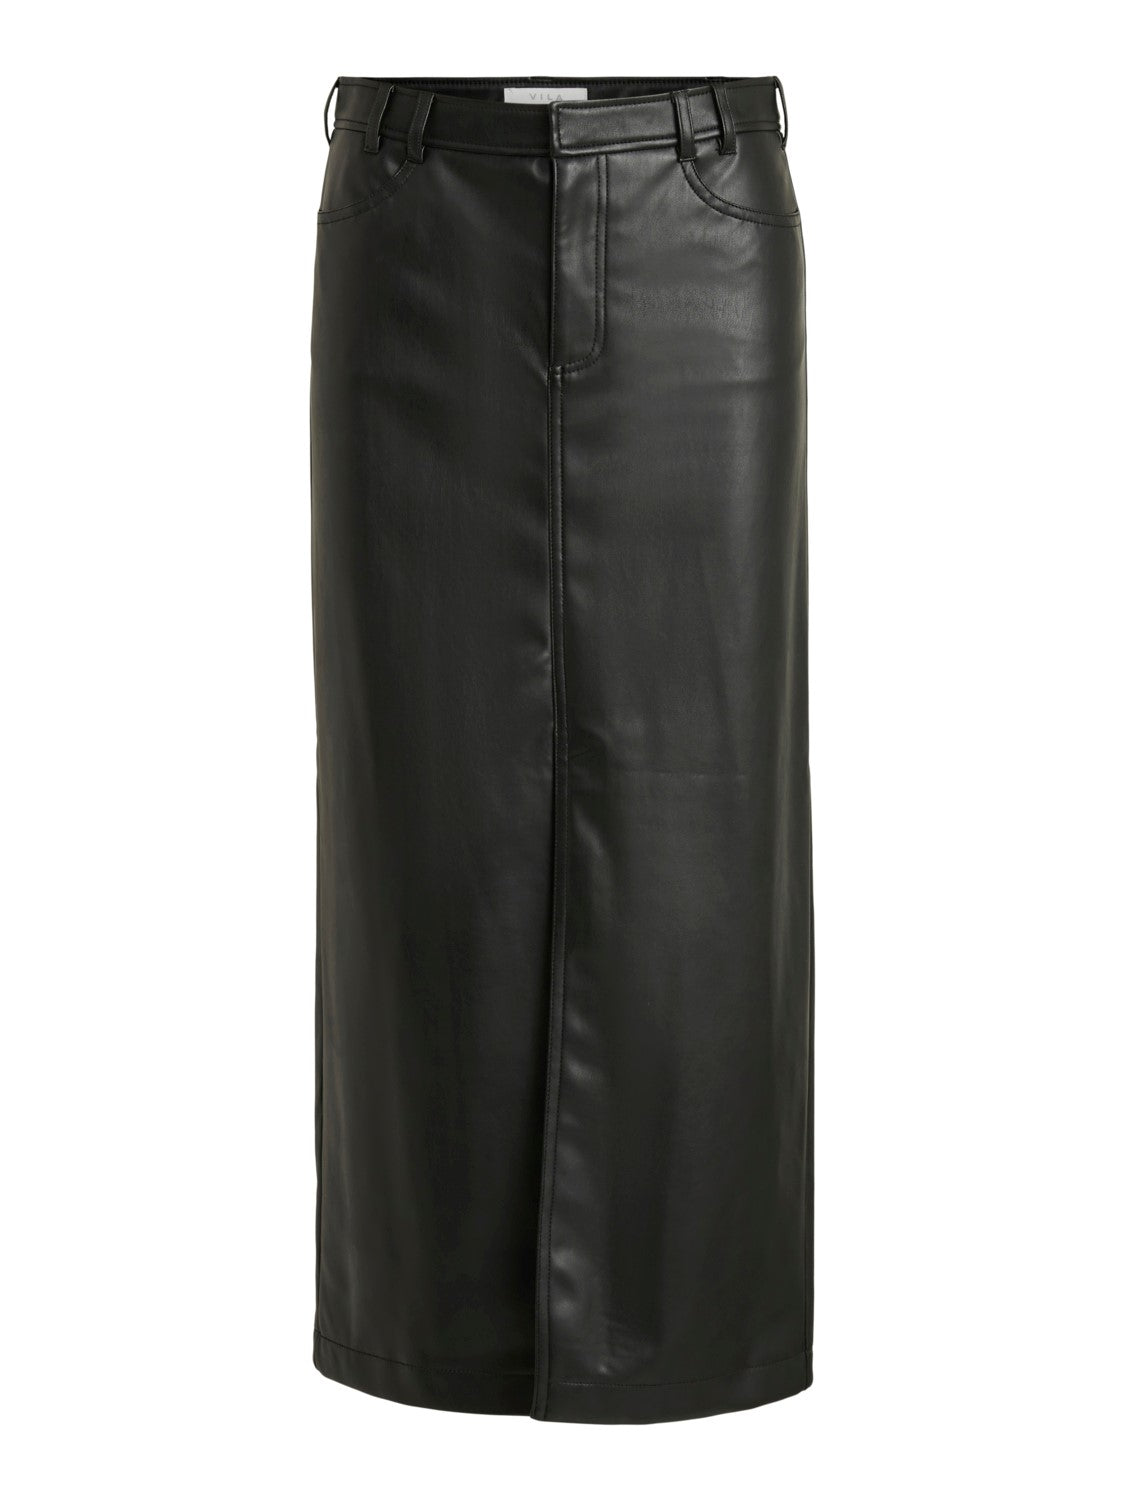 Colina High Waist Faux Leather Skirt (Black)